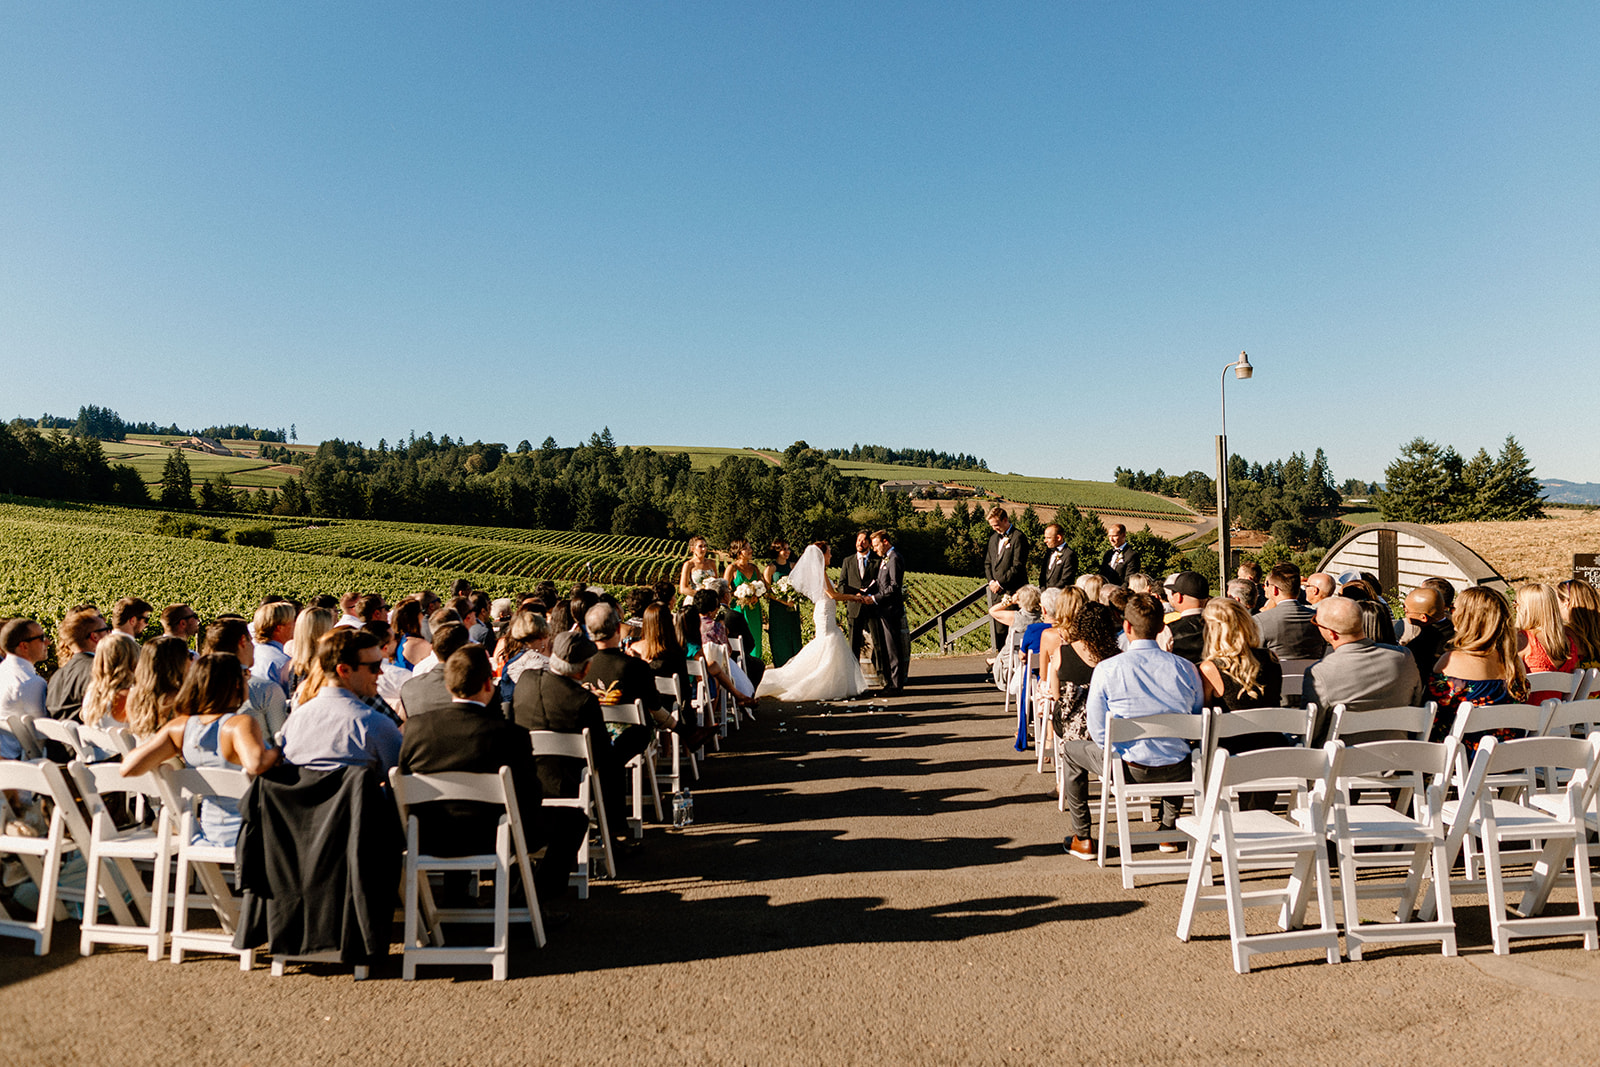 A wedding ceremony at Sokol Blosser winery. 